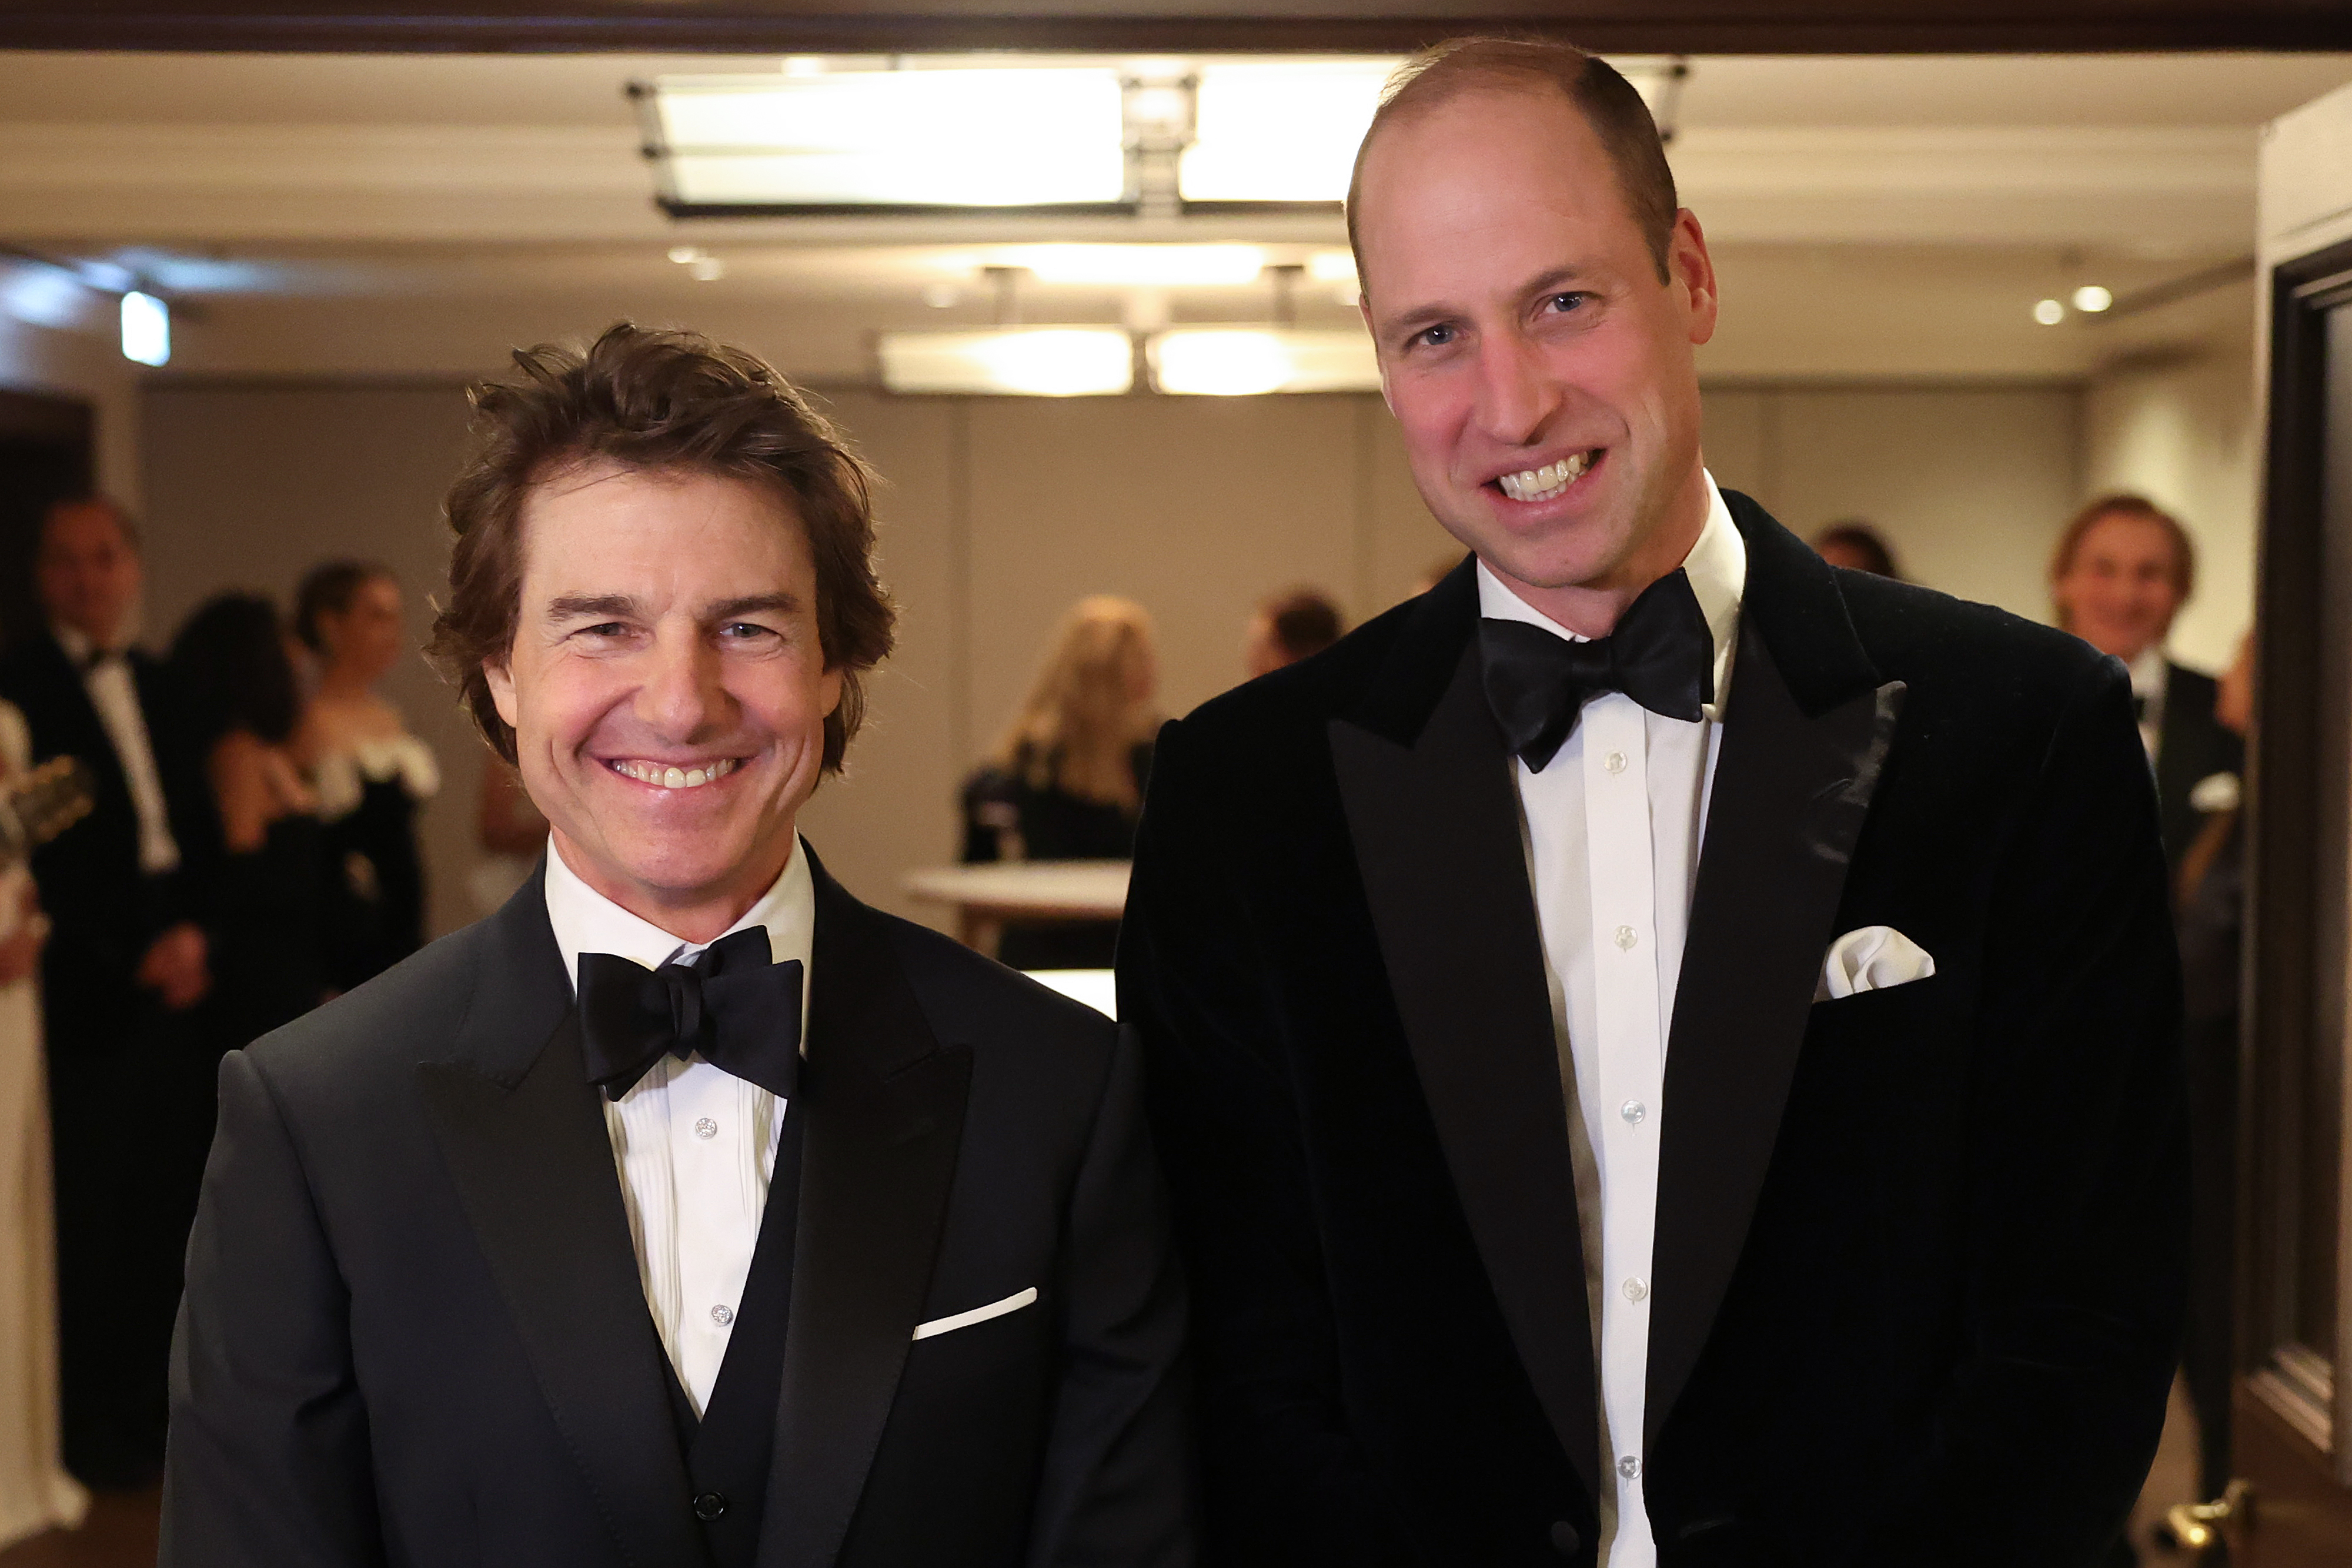 Tom Cruise poses with Britain's Prince William at the London Air Ambulance Charity Gala Dinner on February 7, 2024 in London, England | Source: Getty Images